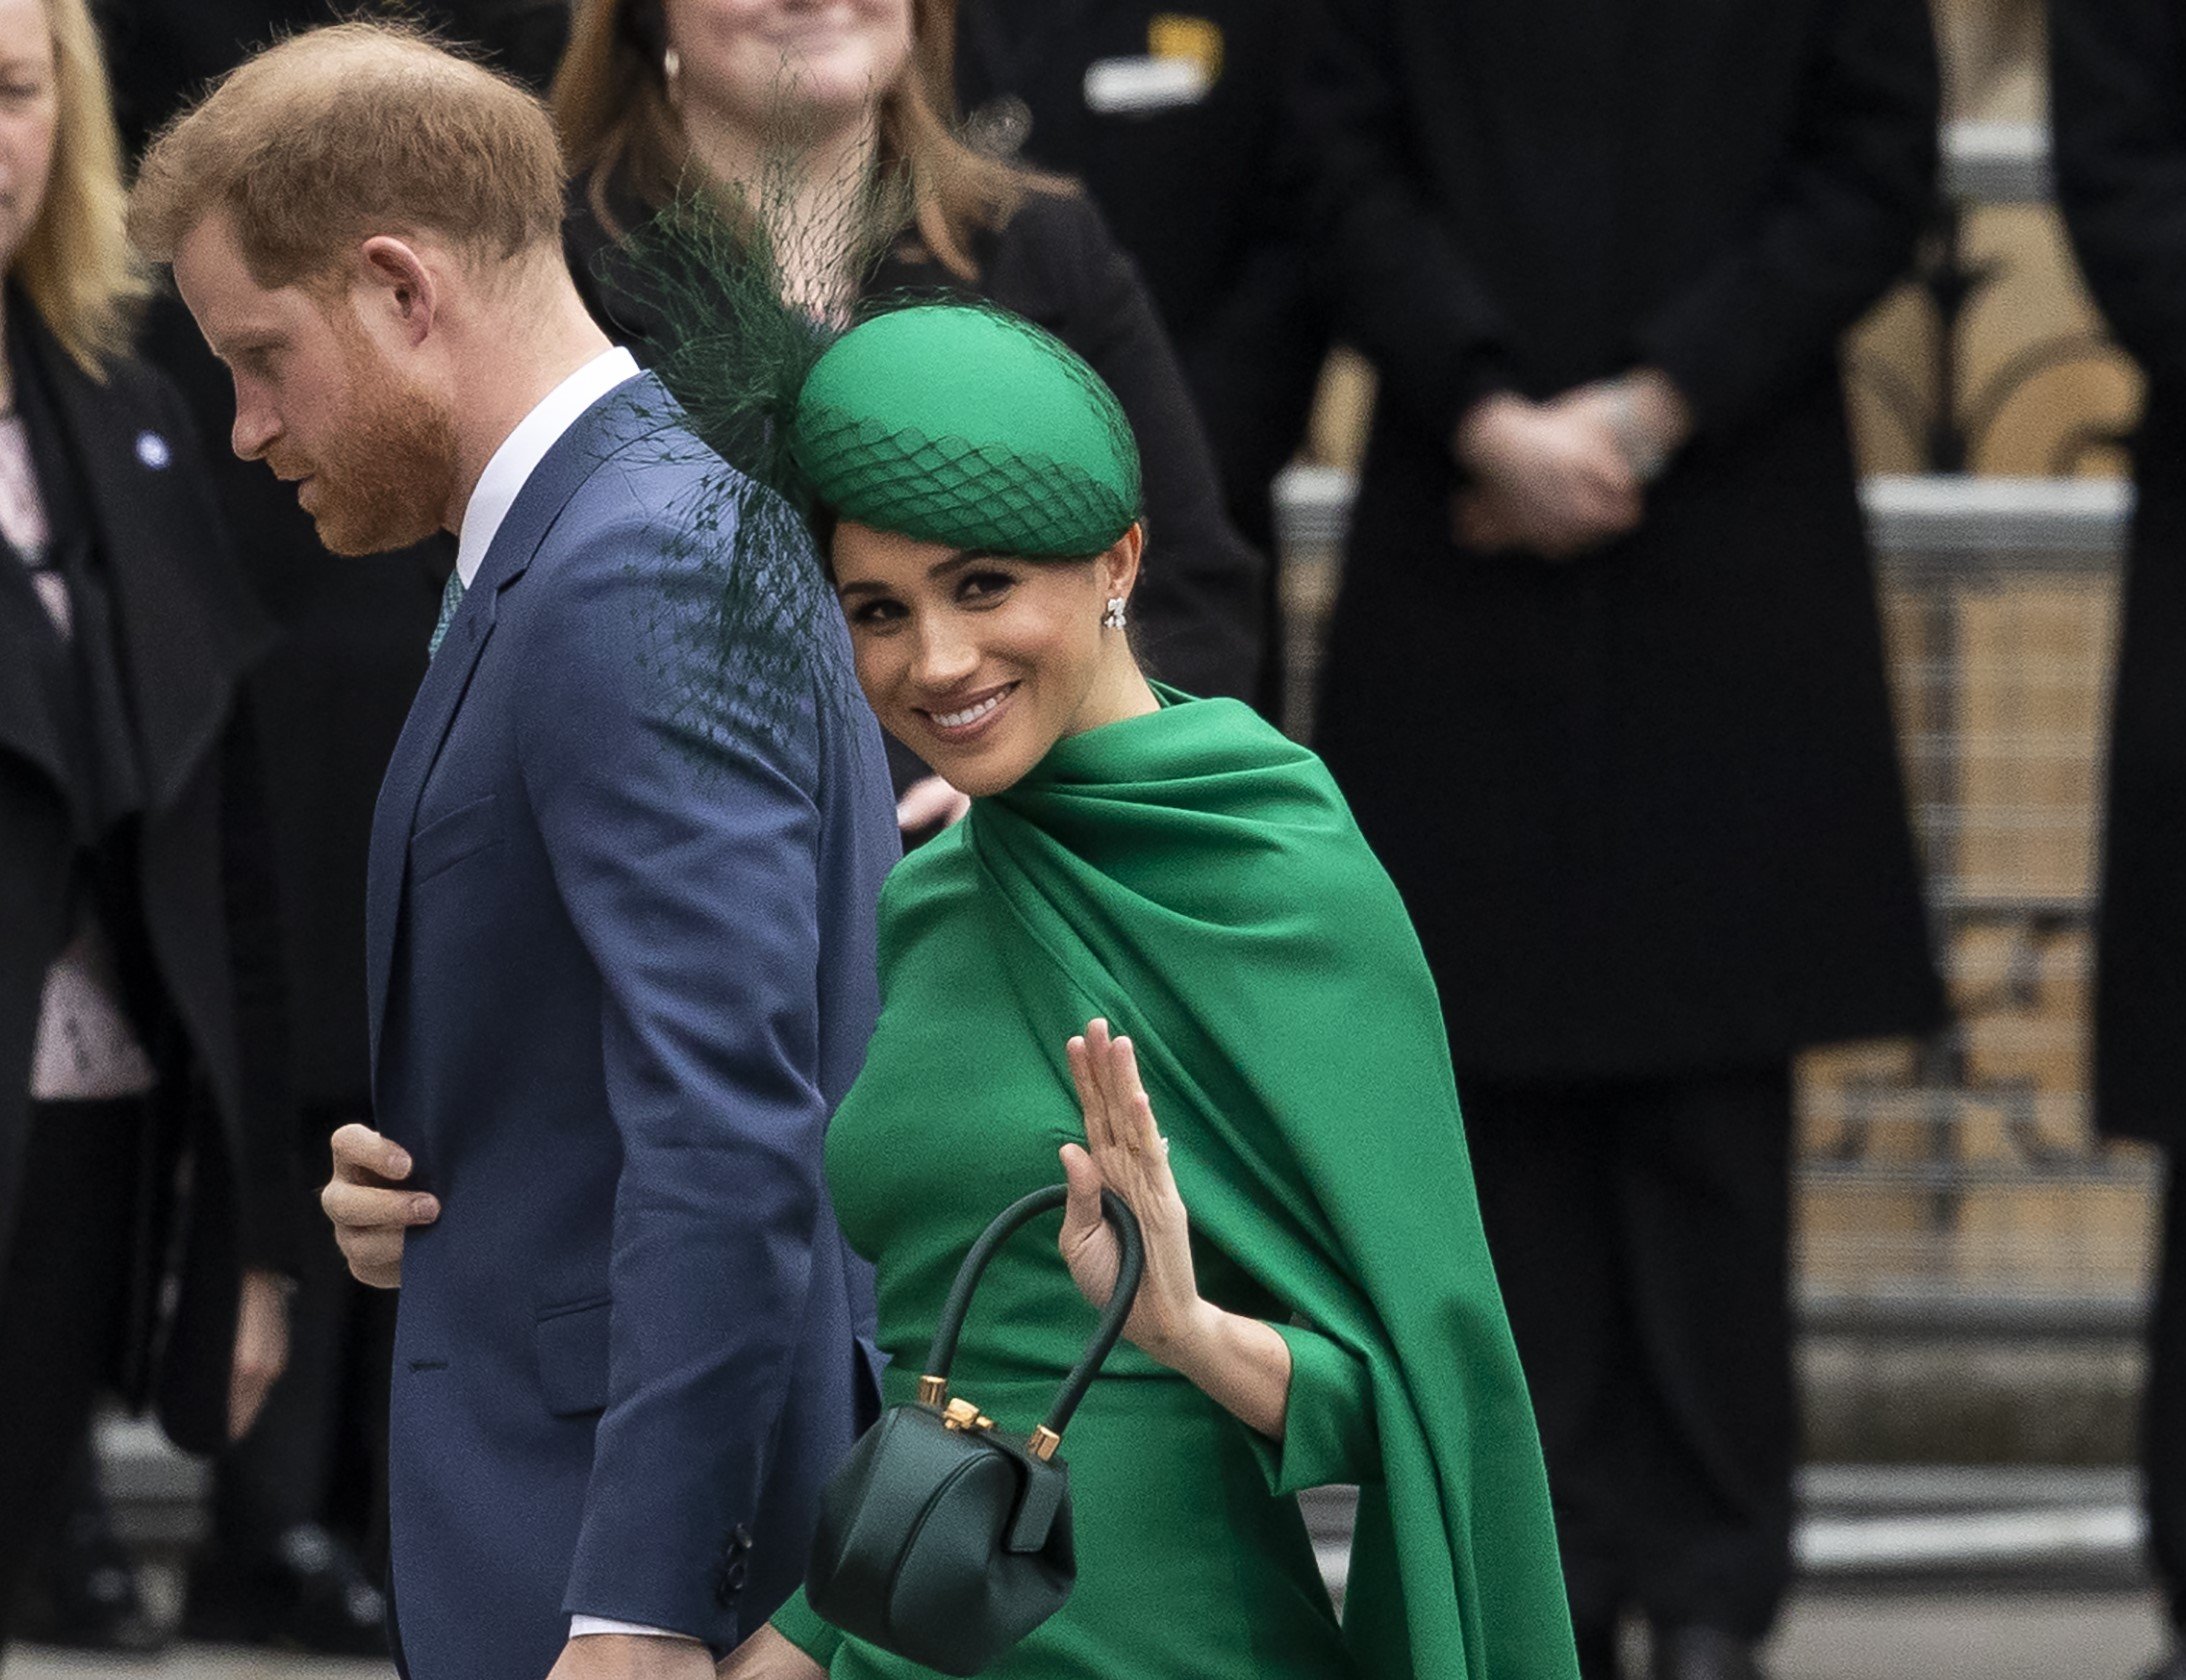 Prince Harry and Meghan Markle arriving for final royal engagement at the annual Commonwealth Service at Westminster Abbey